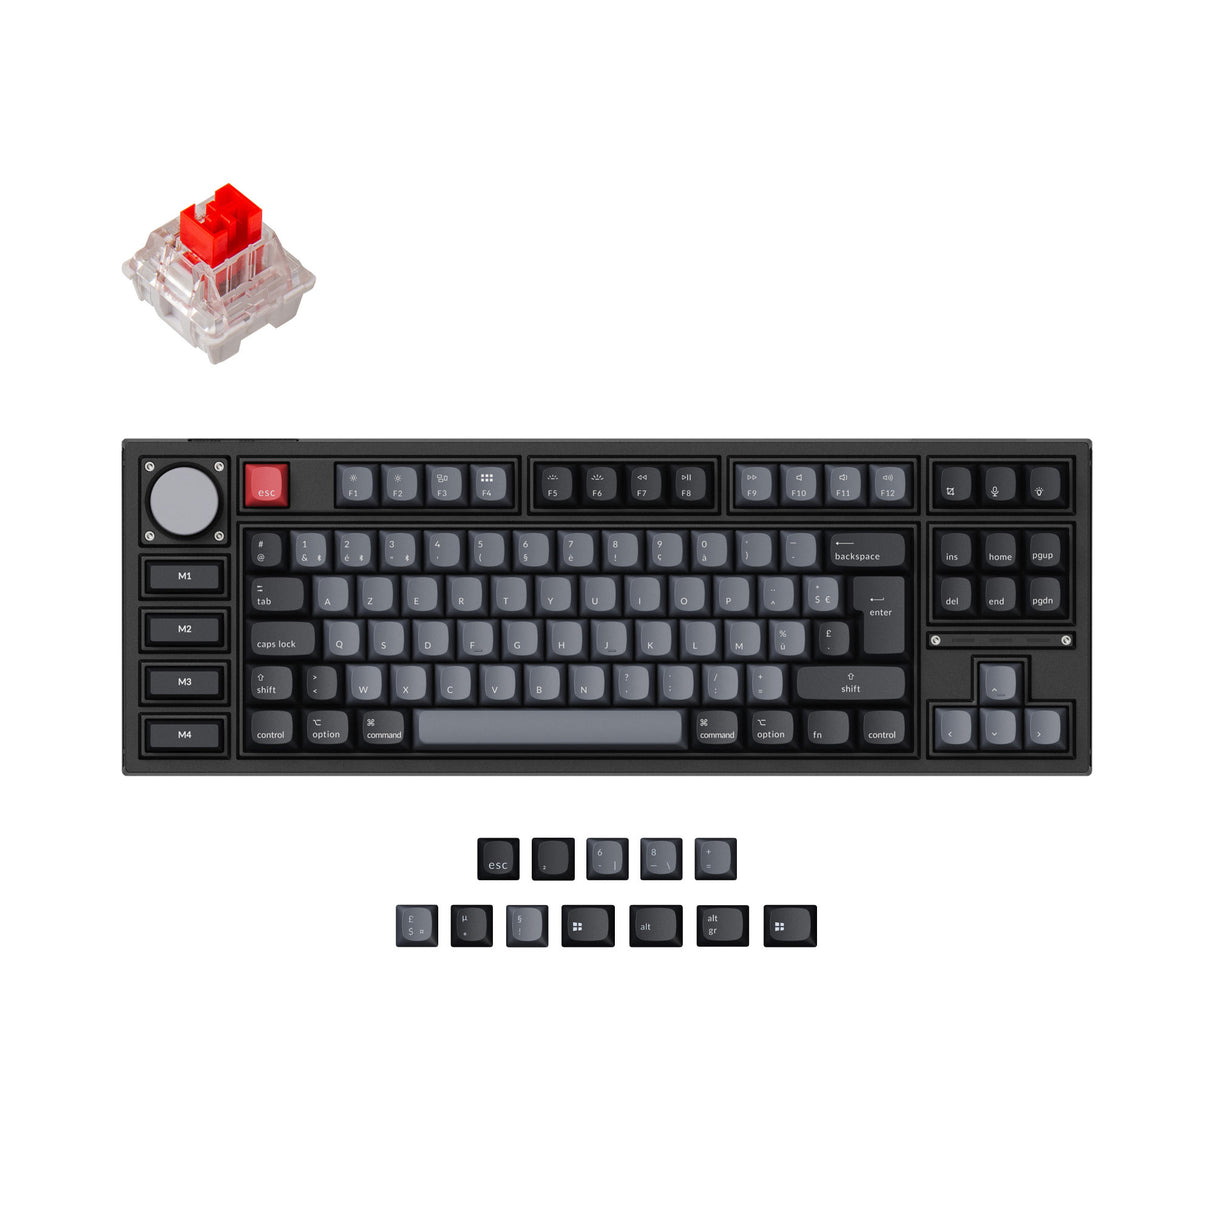 Keychron Q3 Pro QMK/VIA wireless custom mechanical keyboard 80 percent layout aluminum black for Mac WIndows Linux RGB backlight hot-swappable K Pro switch red ISO French layout